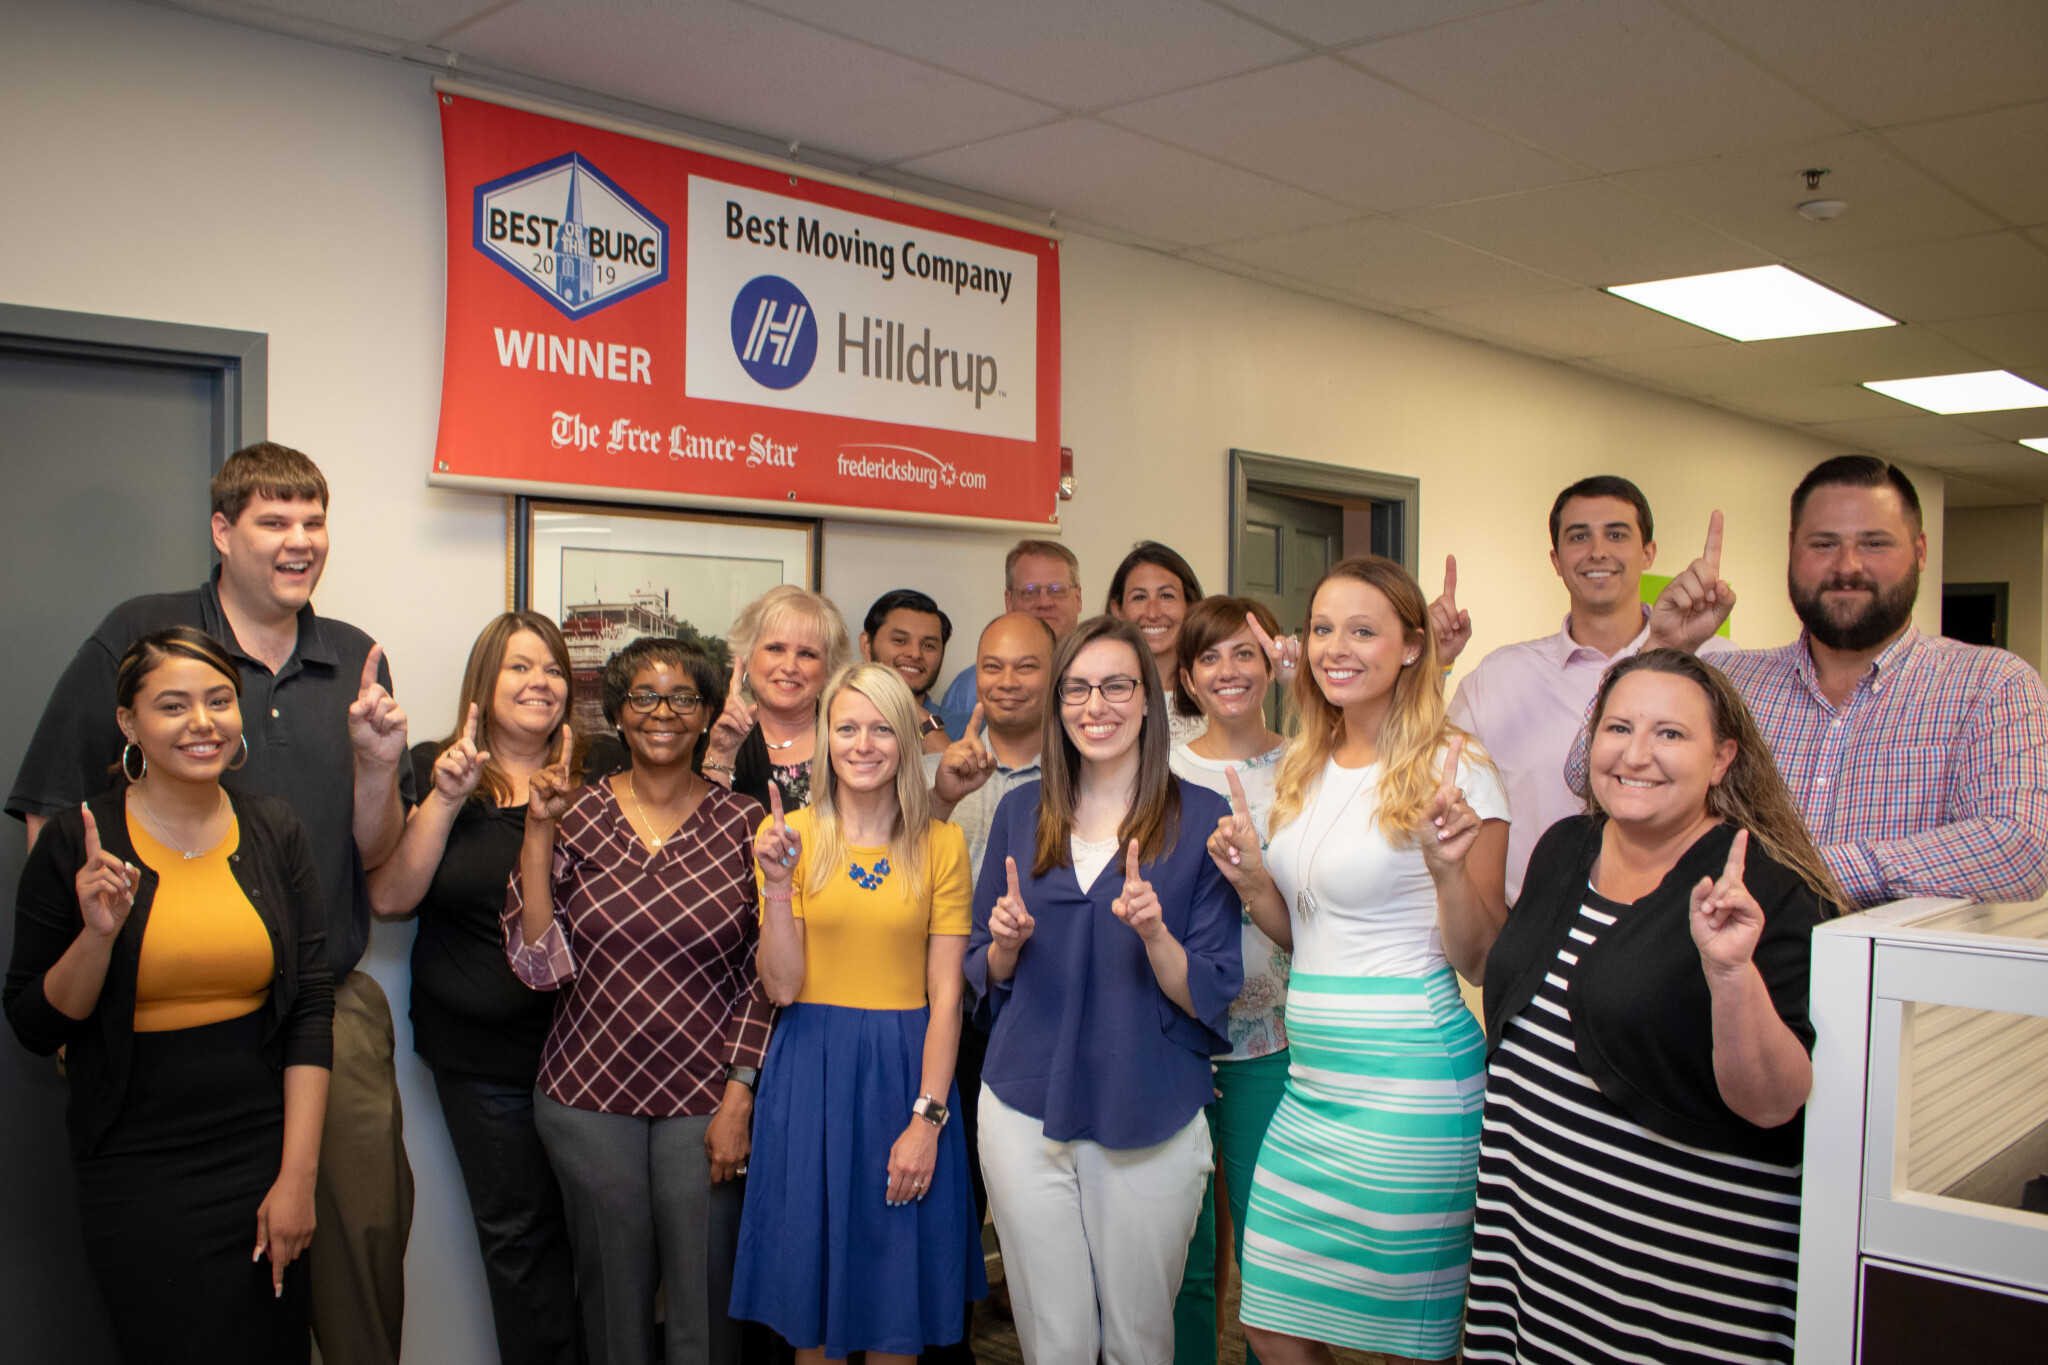 Hilldrup employees raise a "#1" in support of Hilldrup being named the Best Moving Company in the Fredericksburg area.